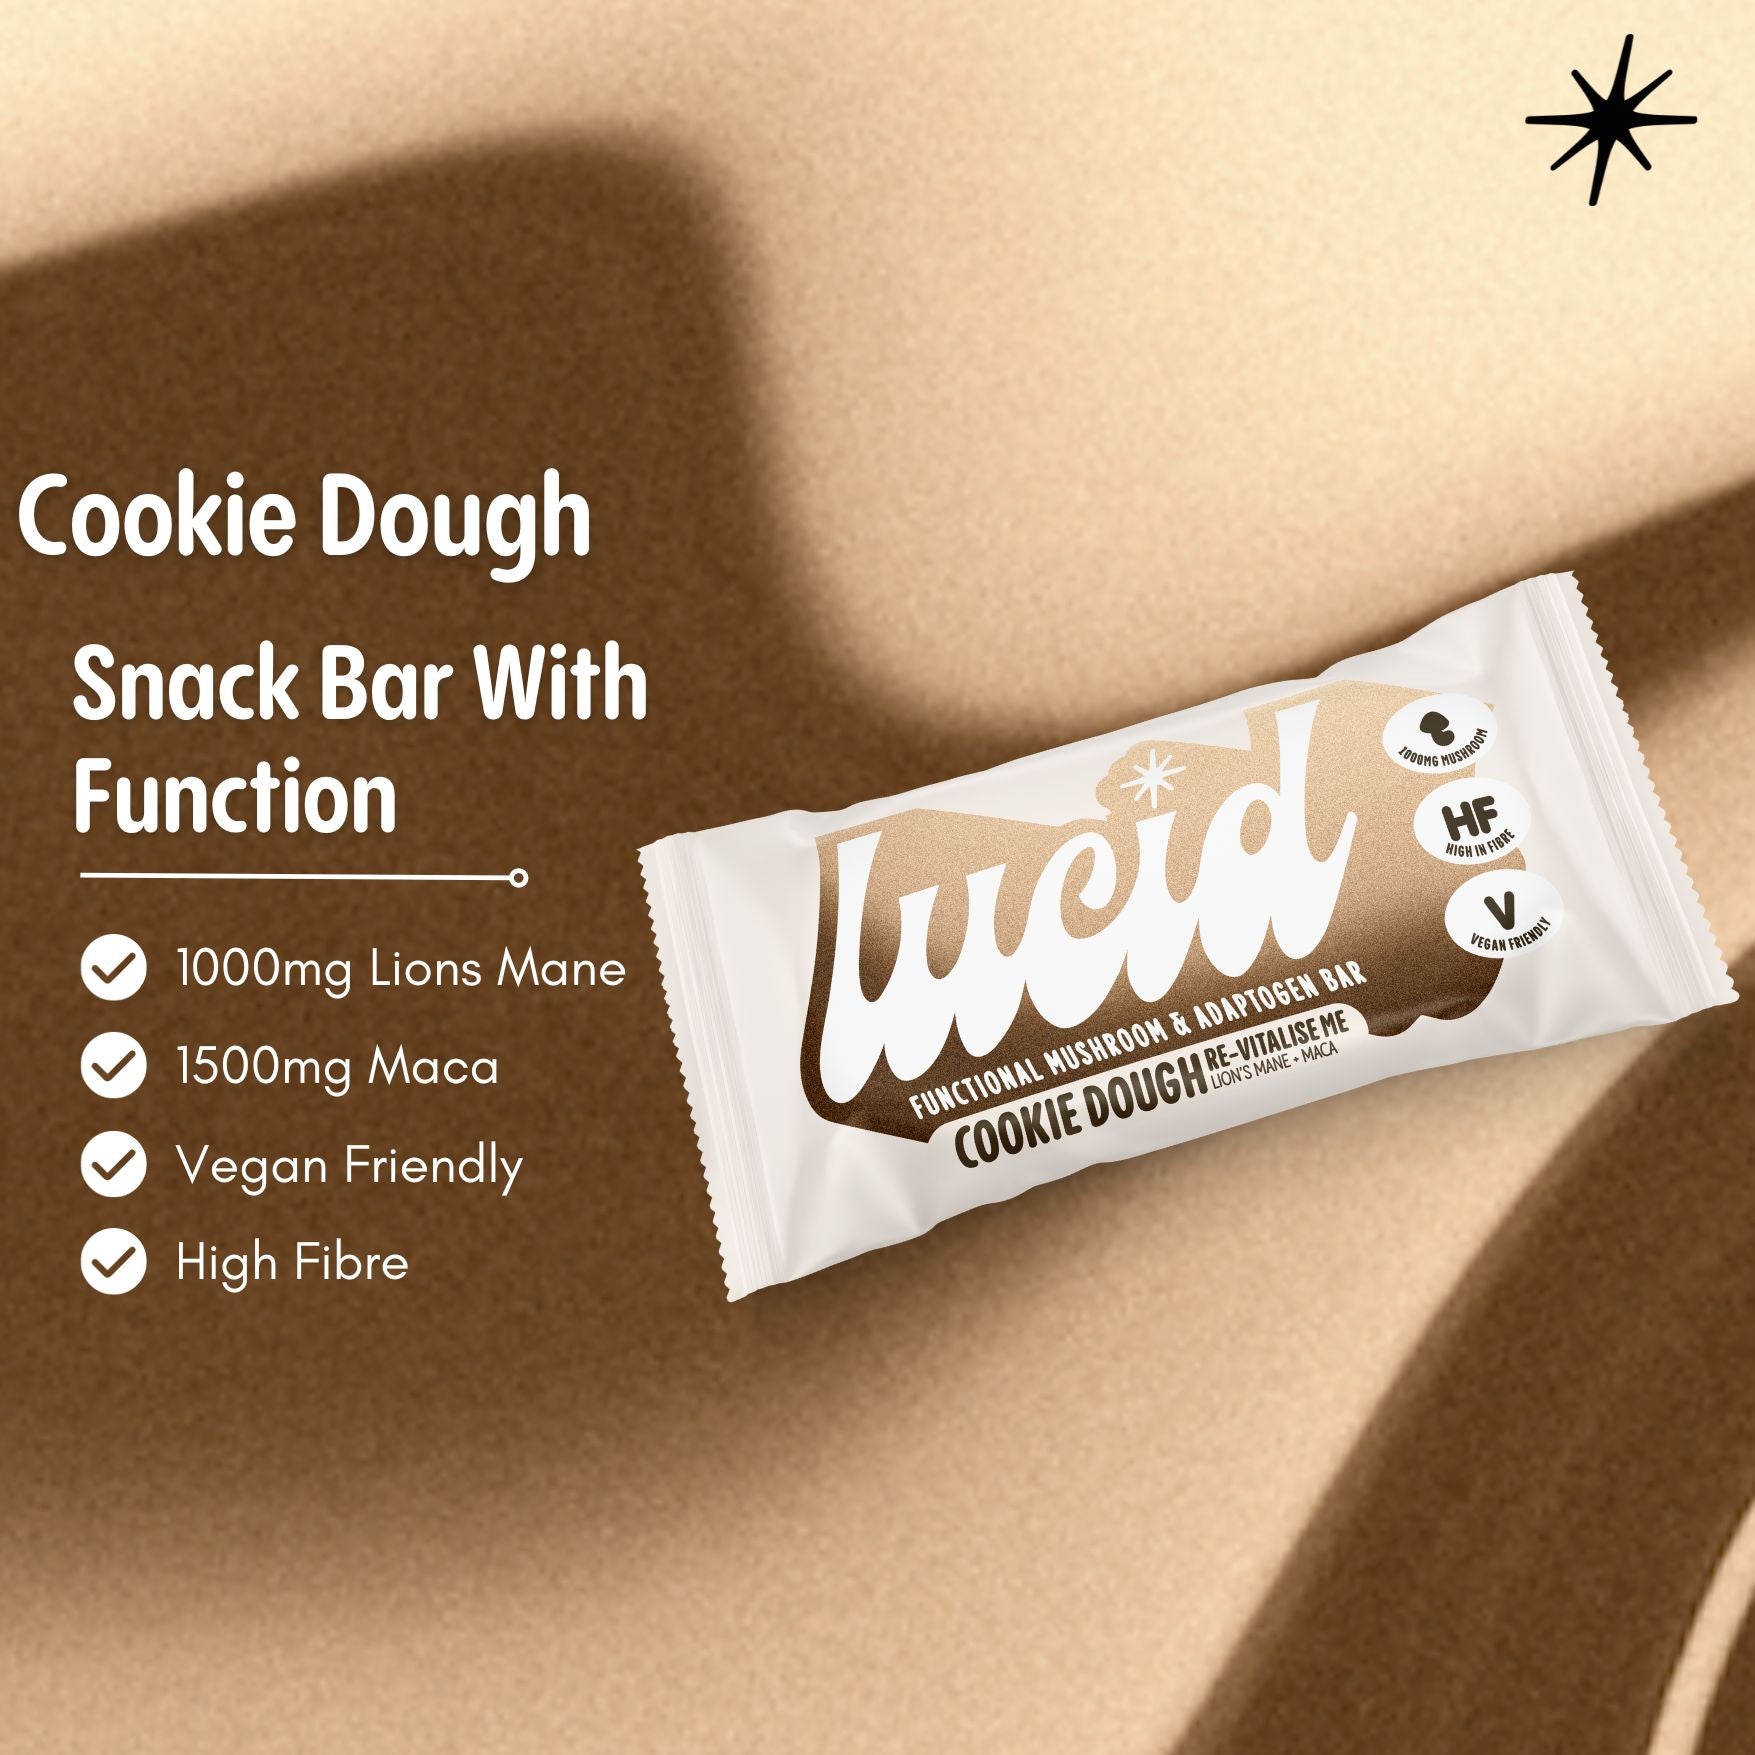 Lucid bar with distinct cookie dough swirl pattern backdrop, highlighting key USPs like 'functional mushrooms and adaptogens', 'vegan friendly', and 'high-fibre'. Premium health snack for mindful consumption.